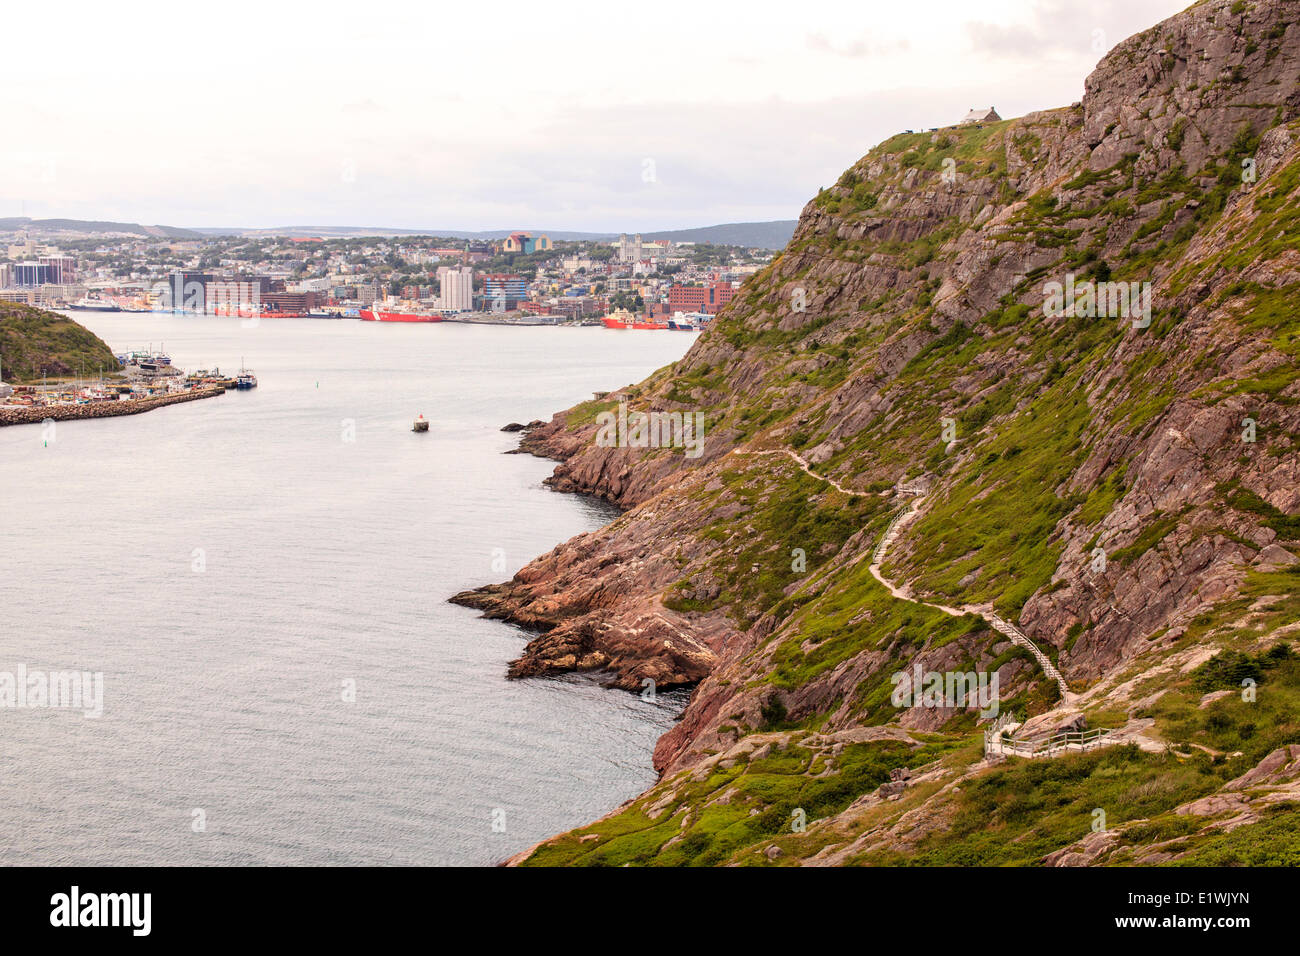 Signal Hill hiking trail and a view of downtown St. John's, Newfoundland. Stock Photo